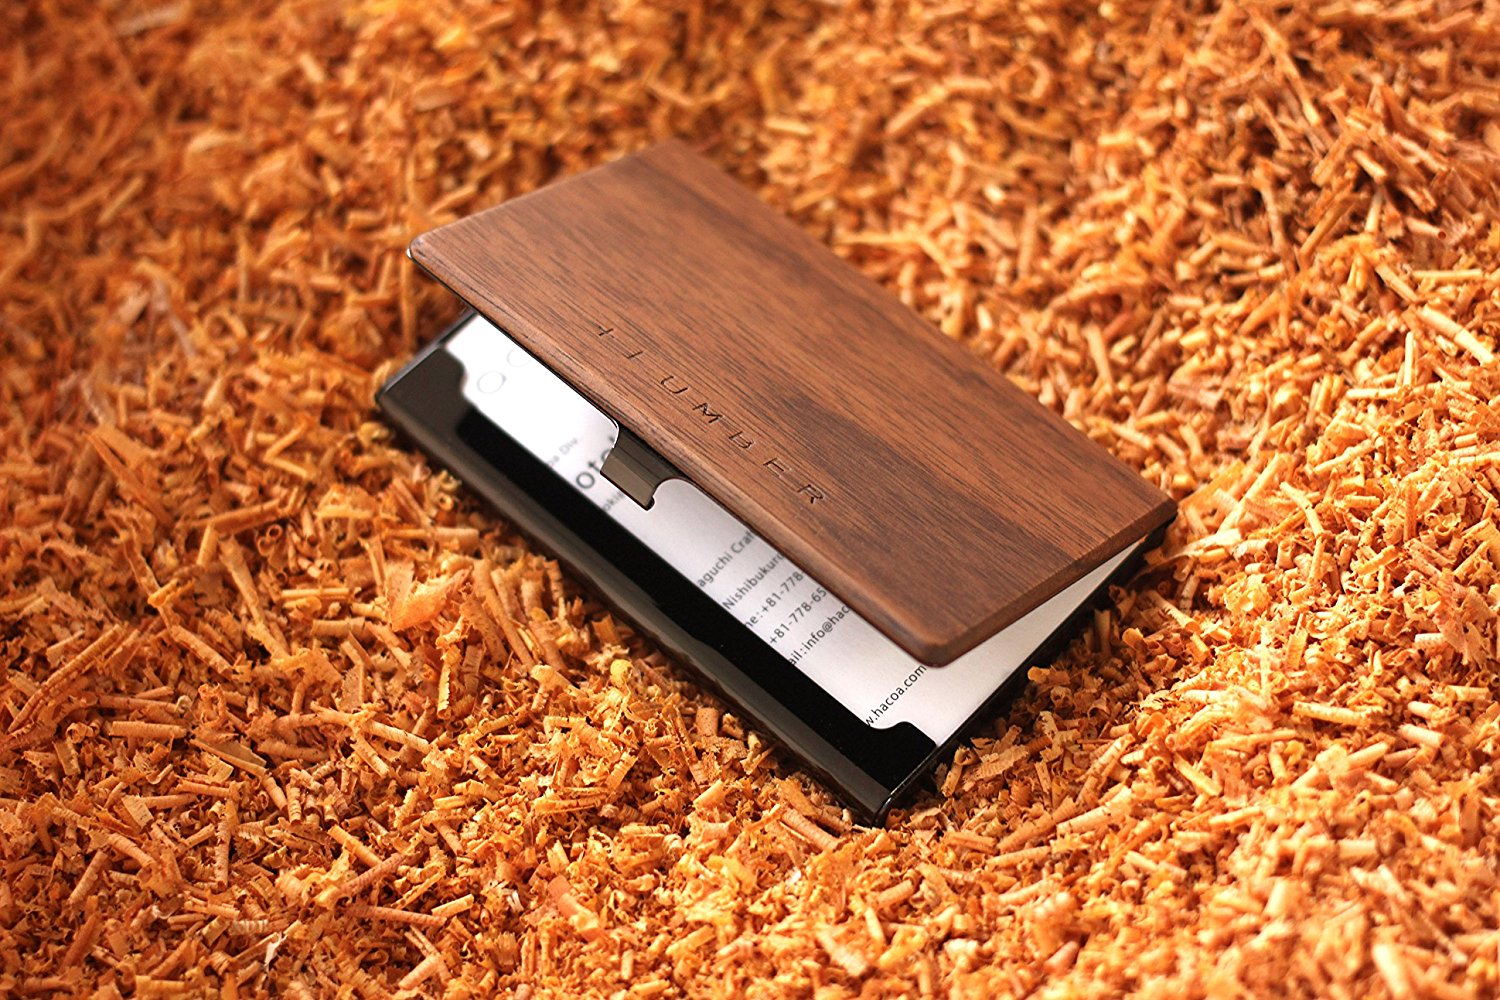 Stainless Case for Business Cards with Wood Accents